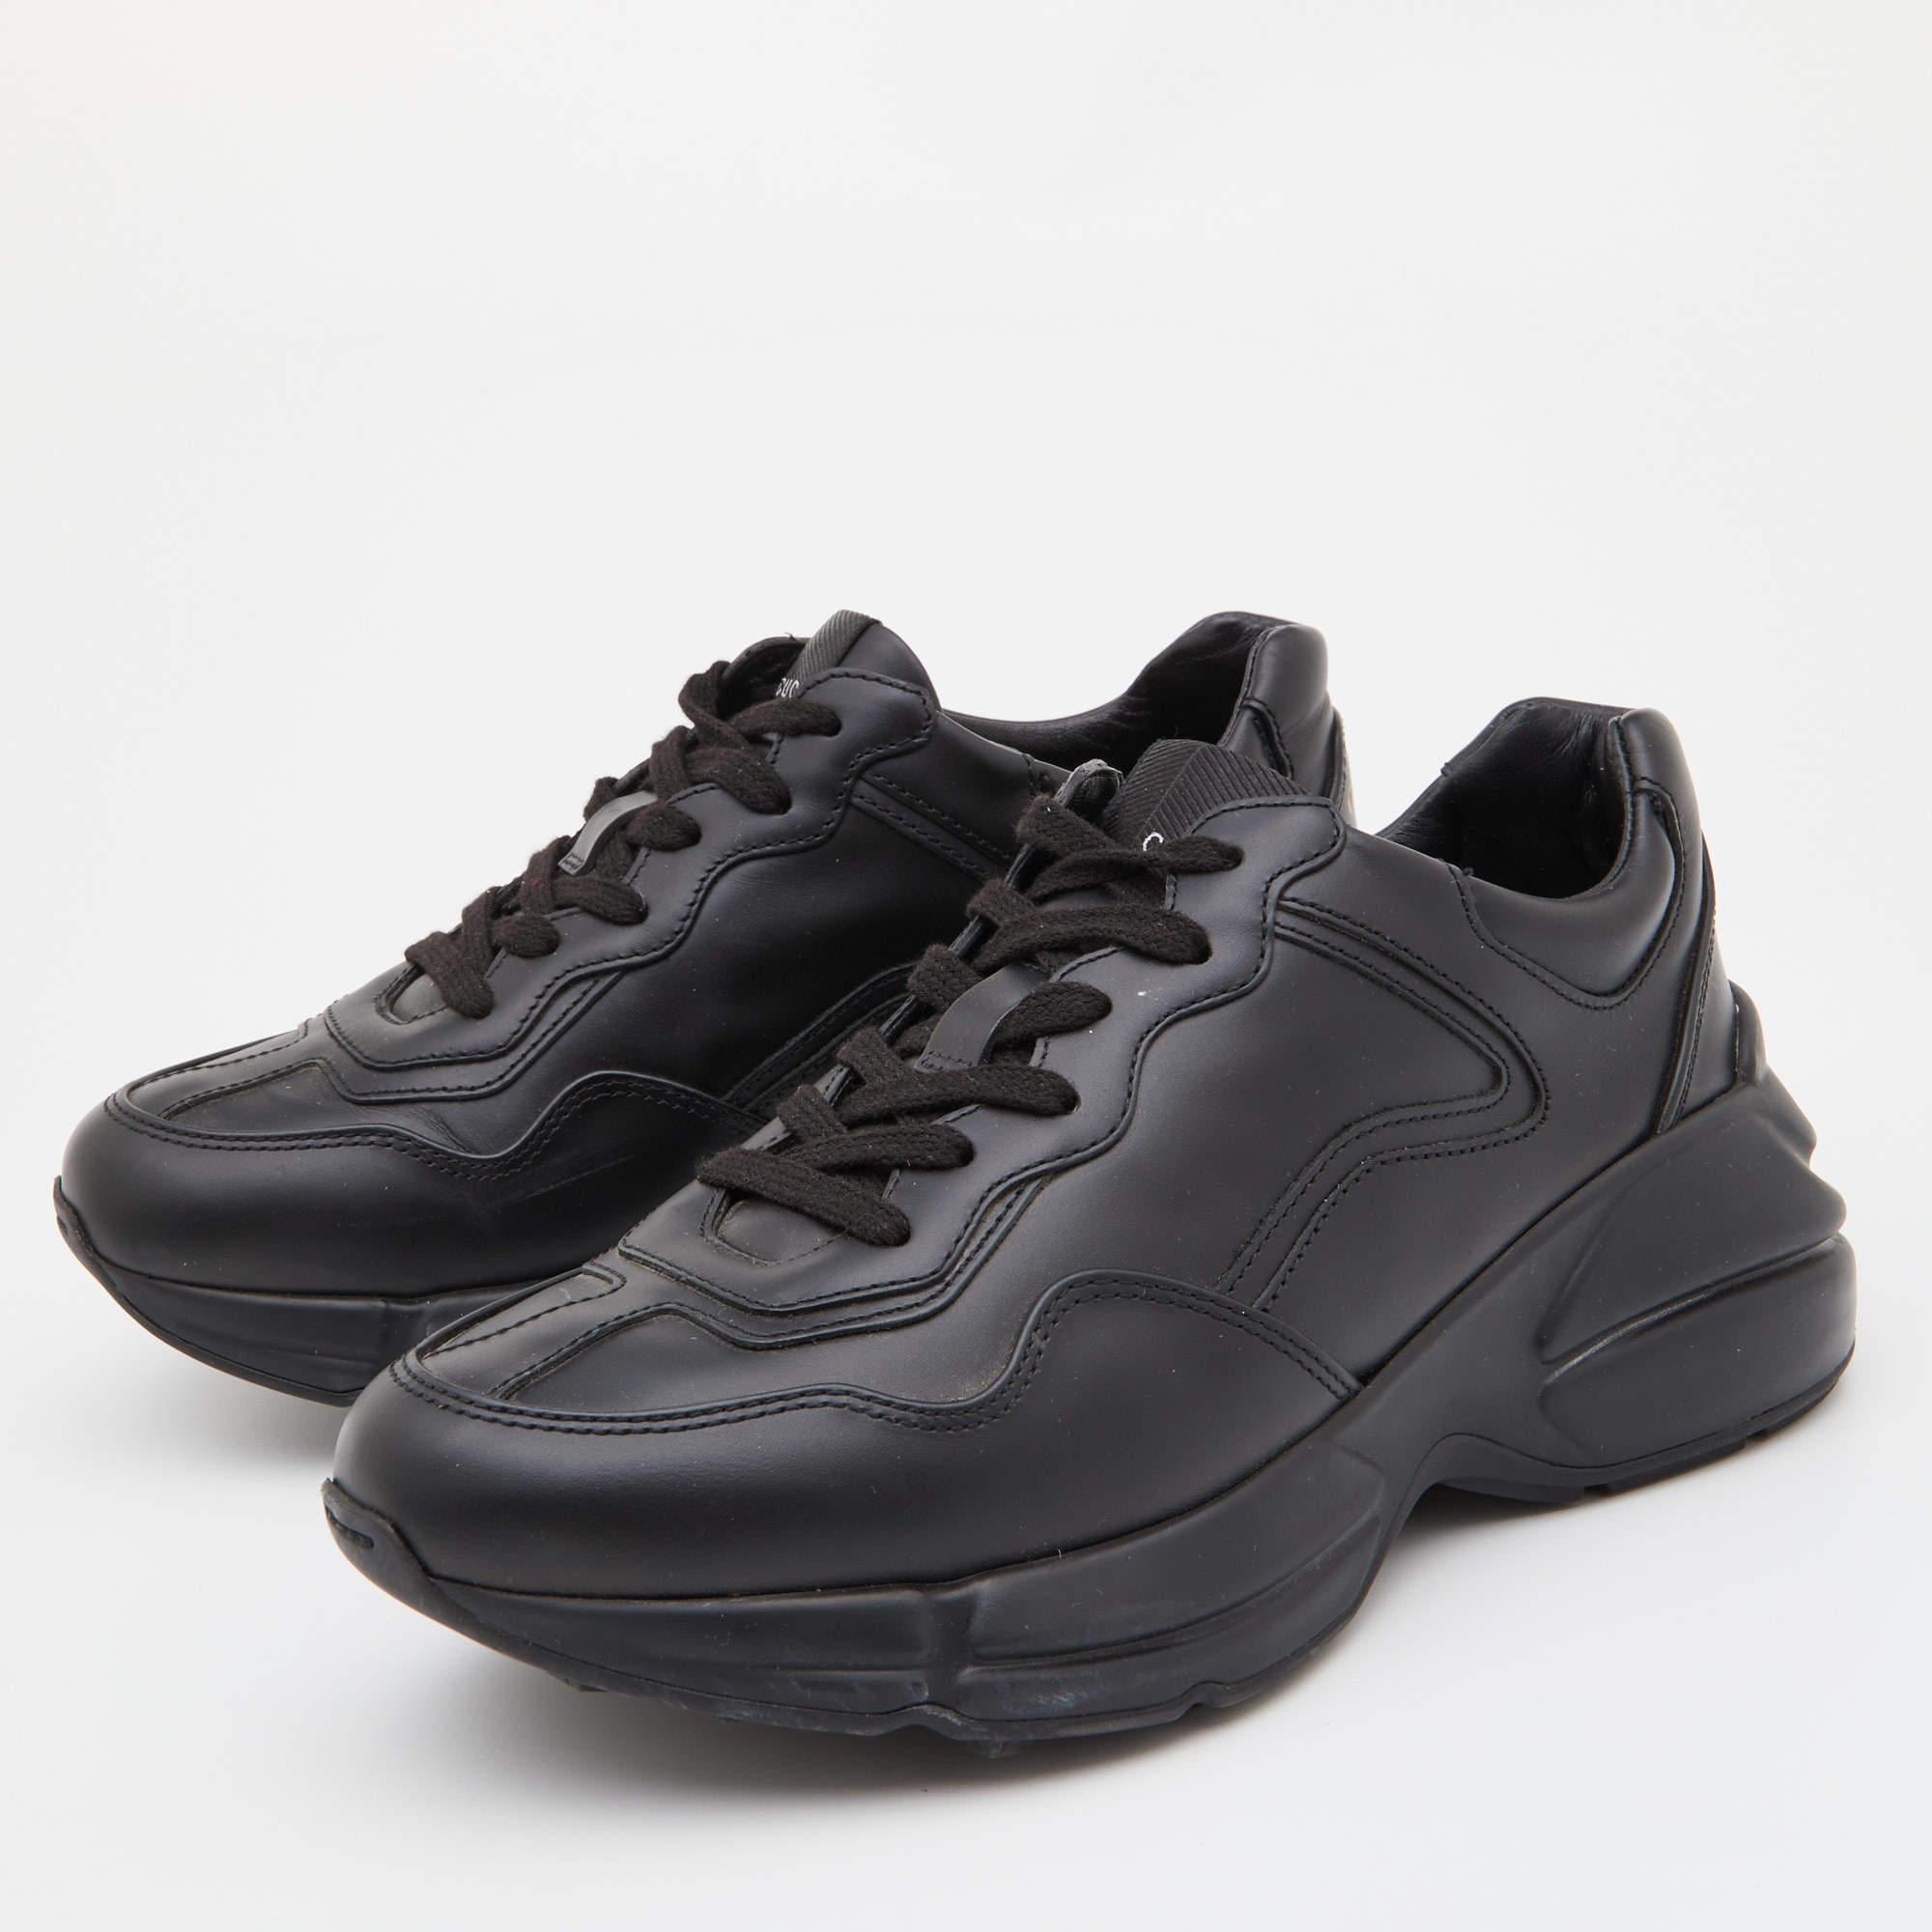 Gucci Black Leather Rhyton Sneakers Size 36 4